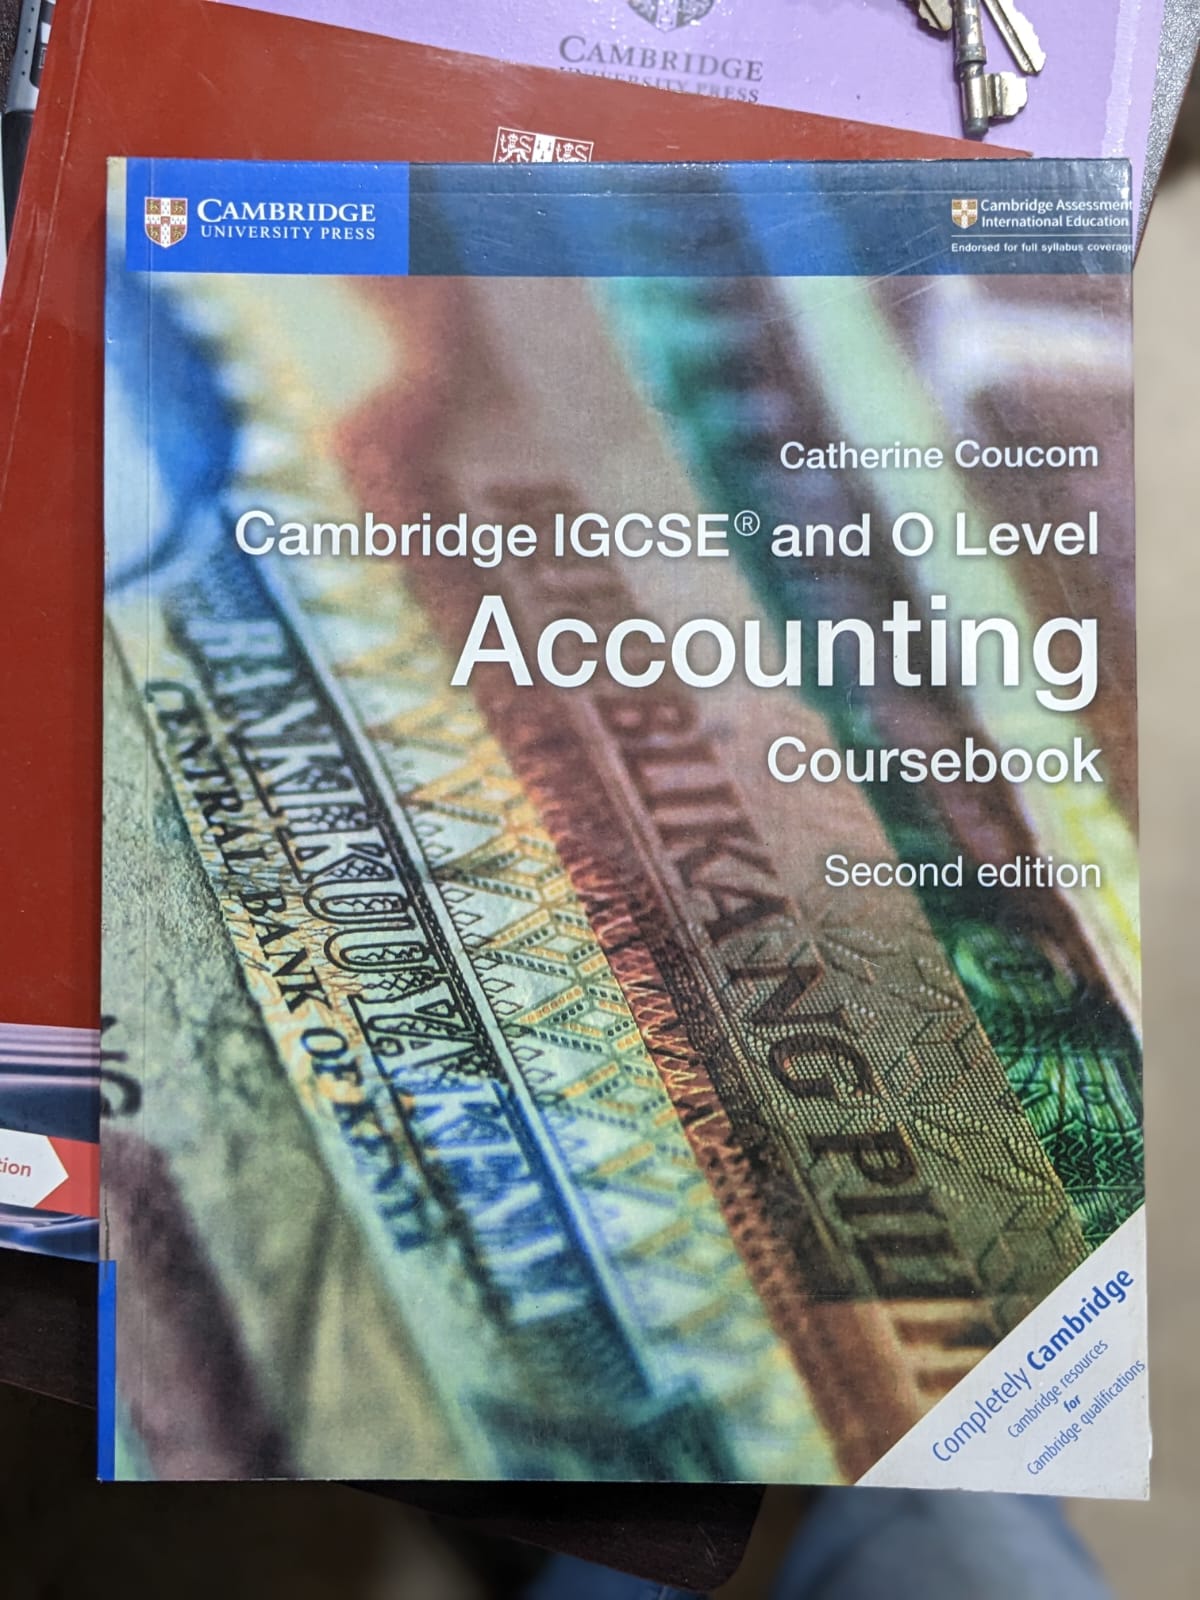 Cambridge IGCSE and O Level Accounting Coursebook 2nd Edition by Catherine Coucom